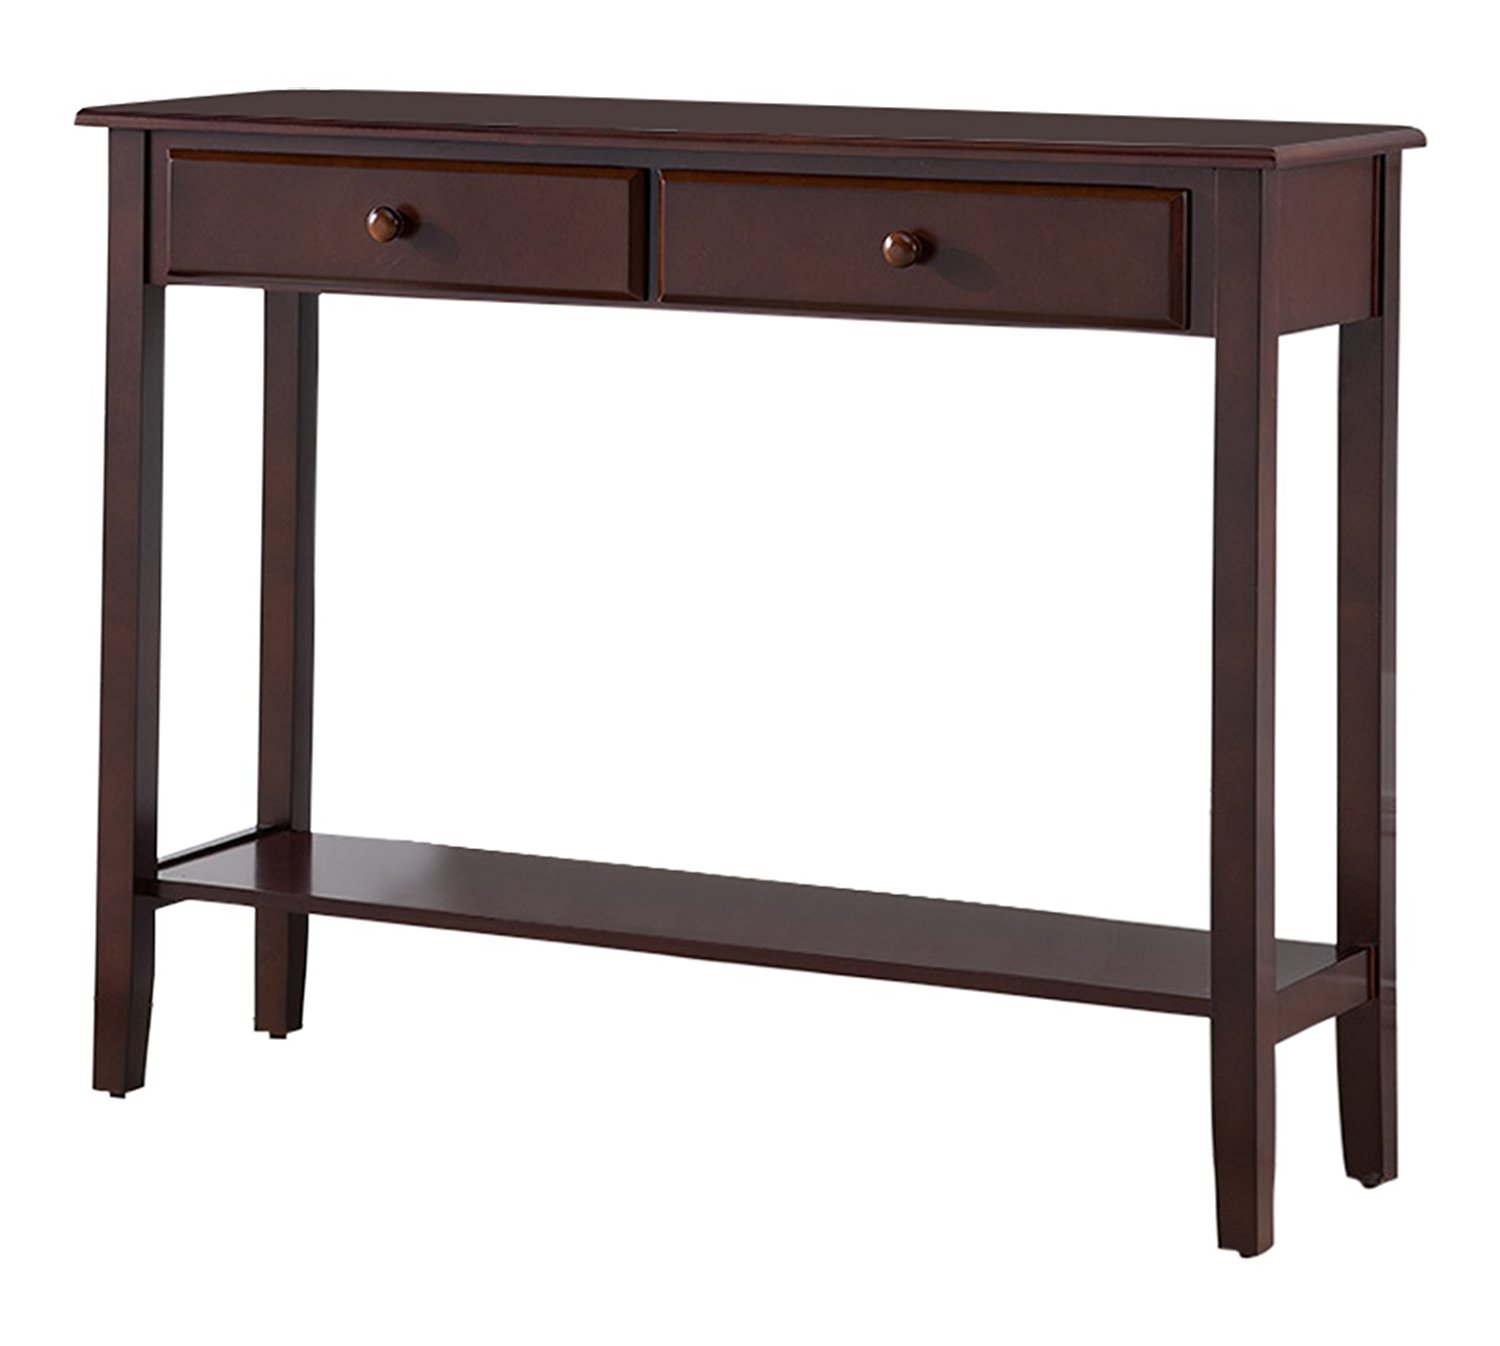 Kings Brand Furniture Console Entryway Table with 2 Drawers, Walnut Finish Wood